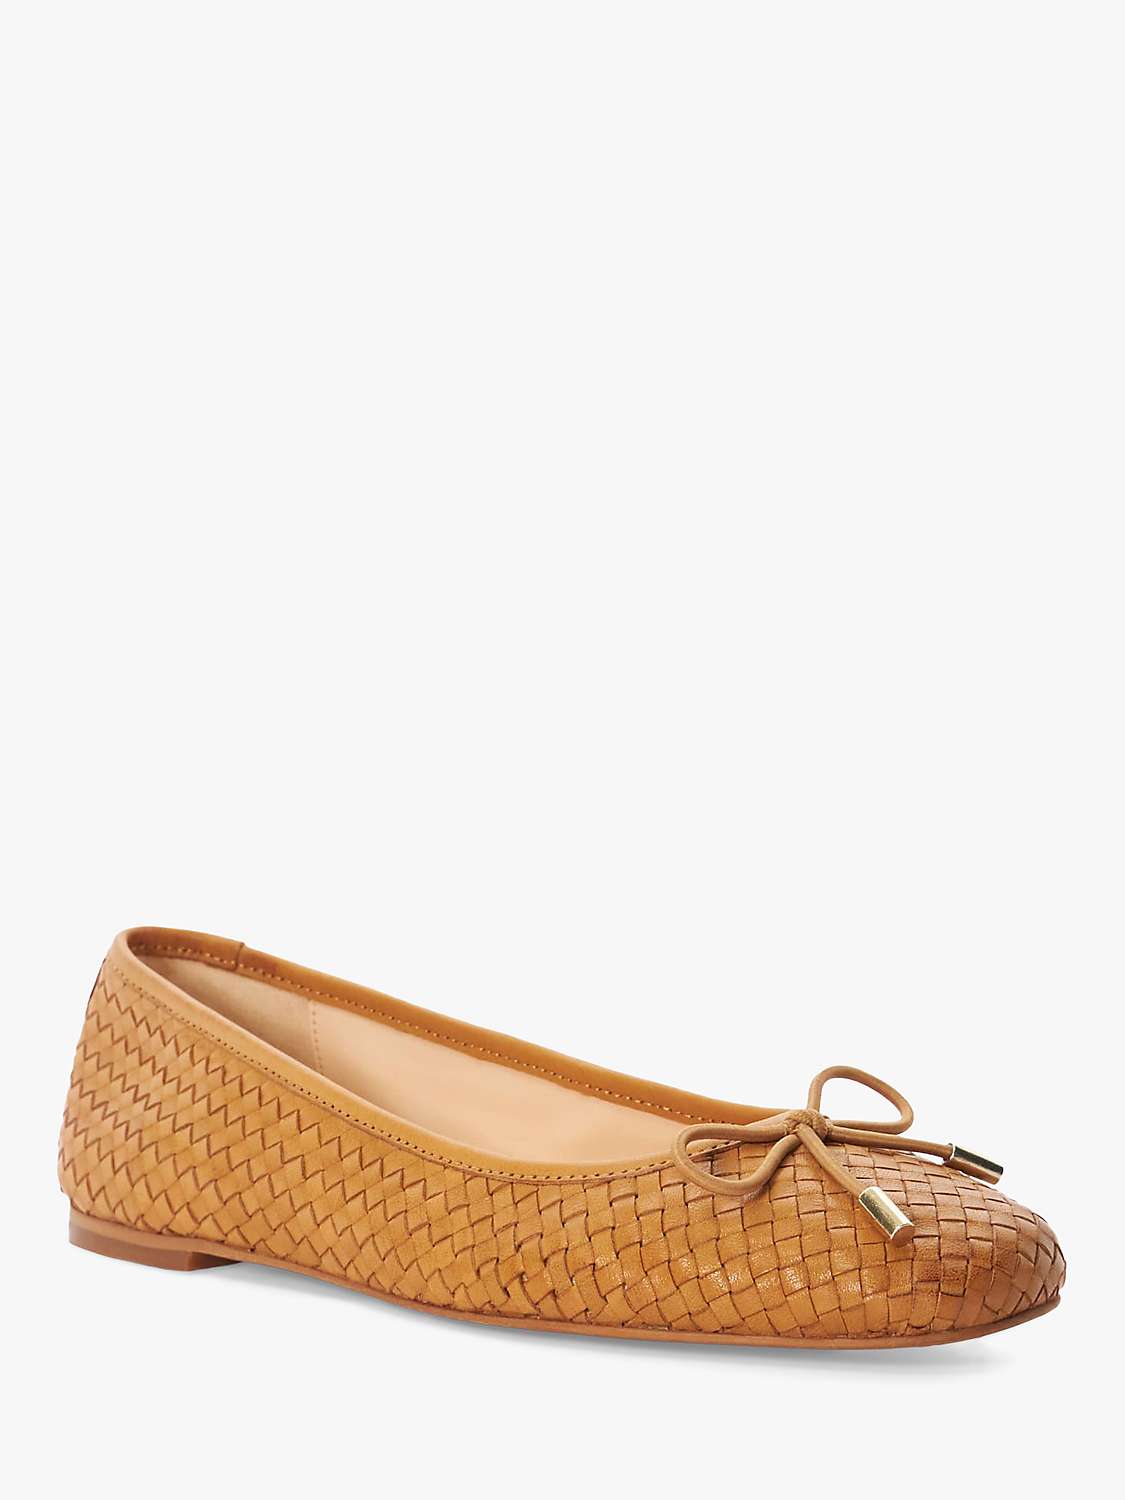 Buy Dune Heights Leather Pumps, Tan Online at johnlewis.com